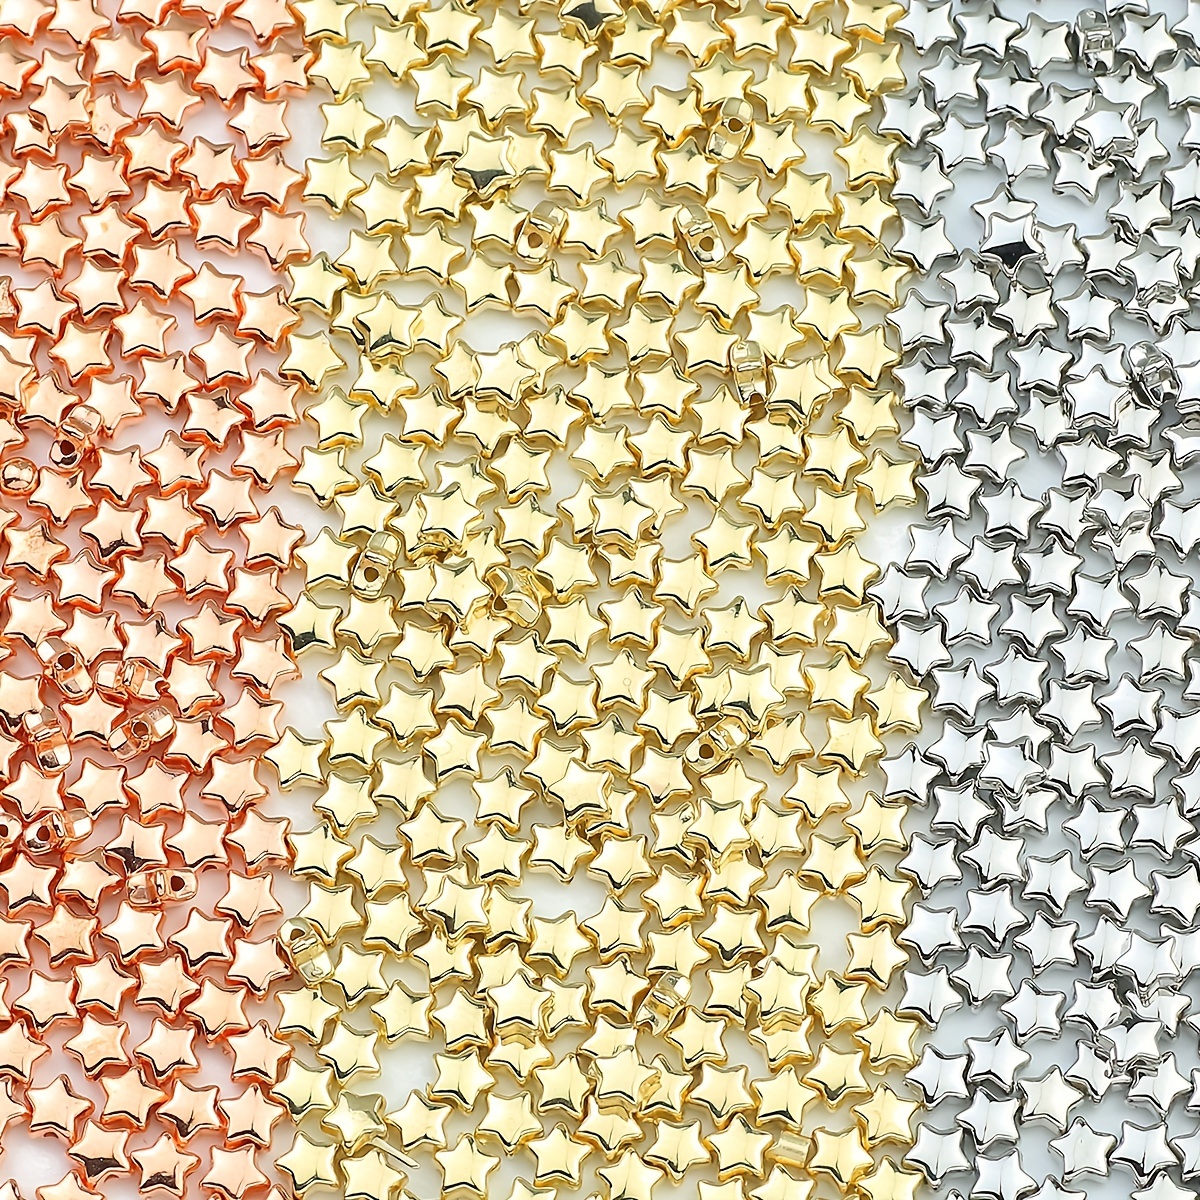 2520 PCS Gold Spacer Beads for Jewelry Making Kit, Spacer Beads for  Bracelets Making (Gold, Sliver, Rose Gold, KC Gold)